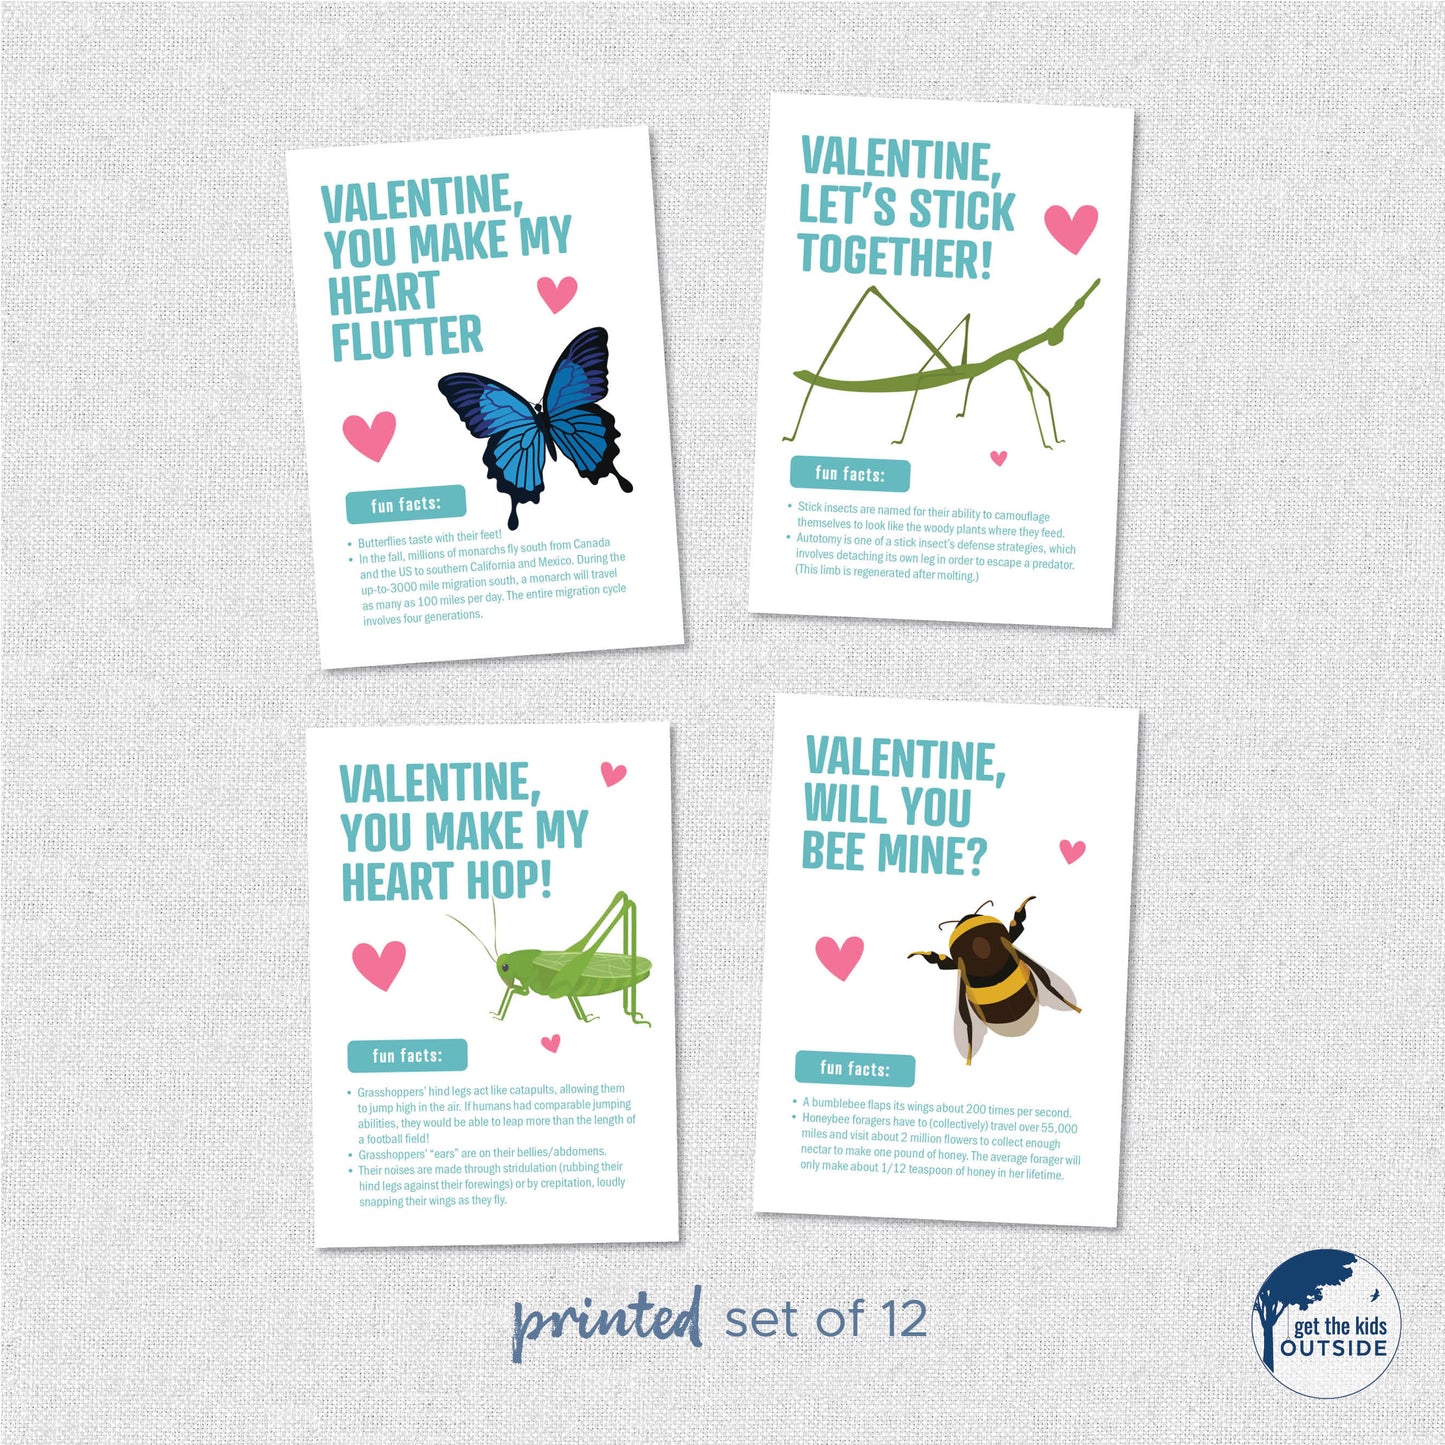 Valentines - Insects A - printed (set of 12)